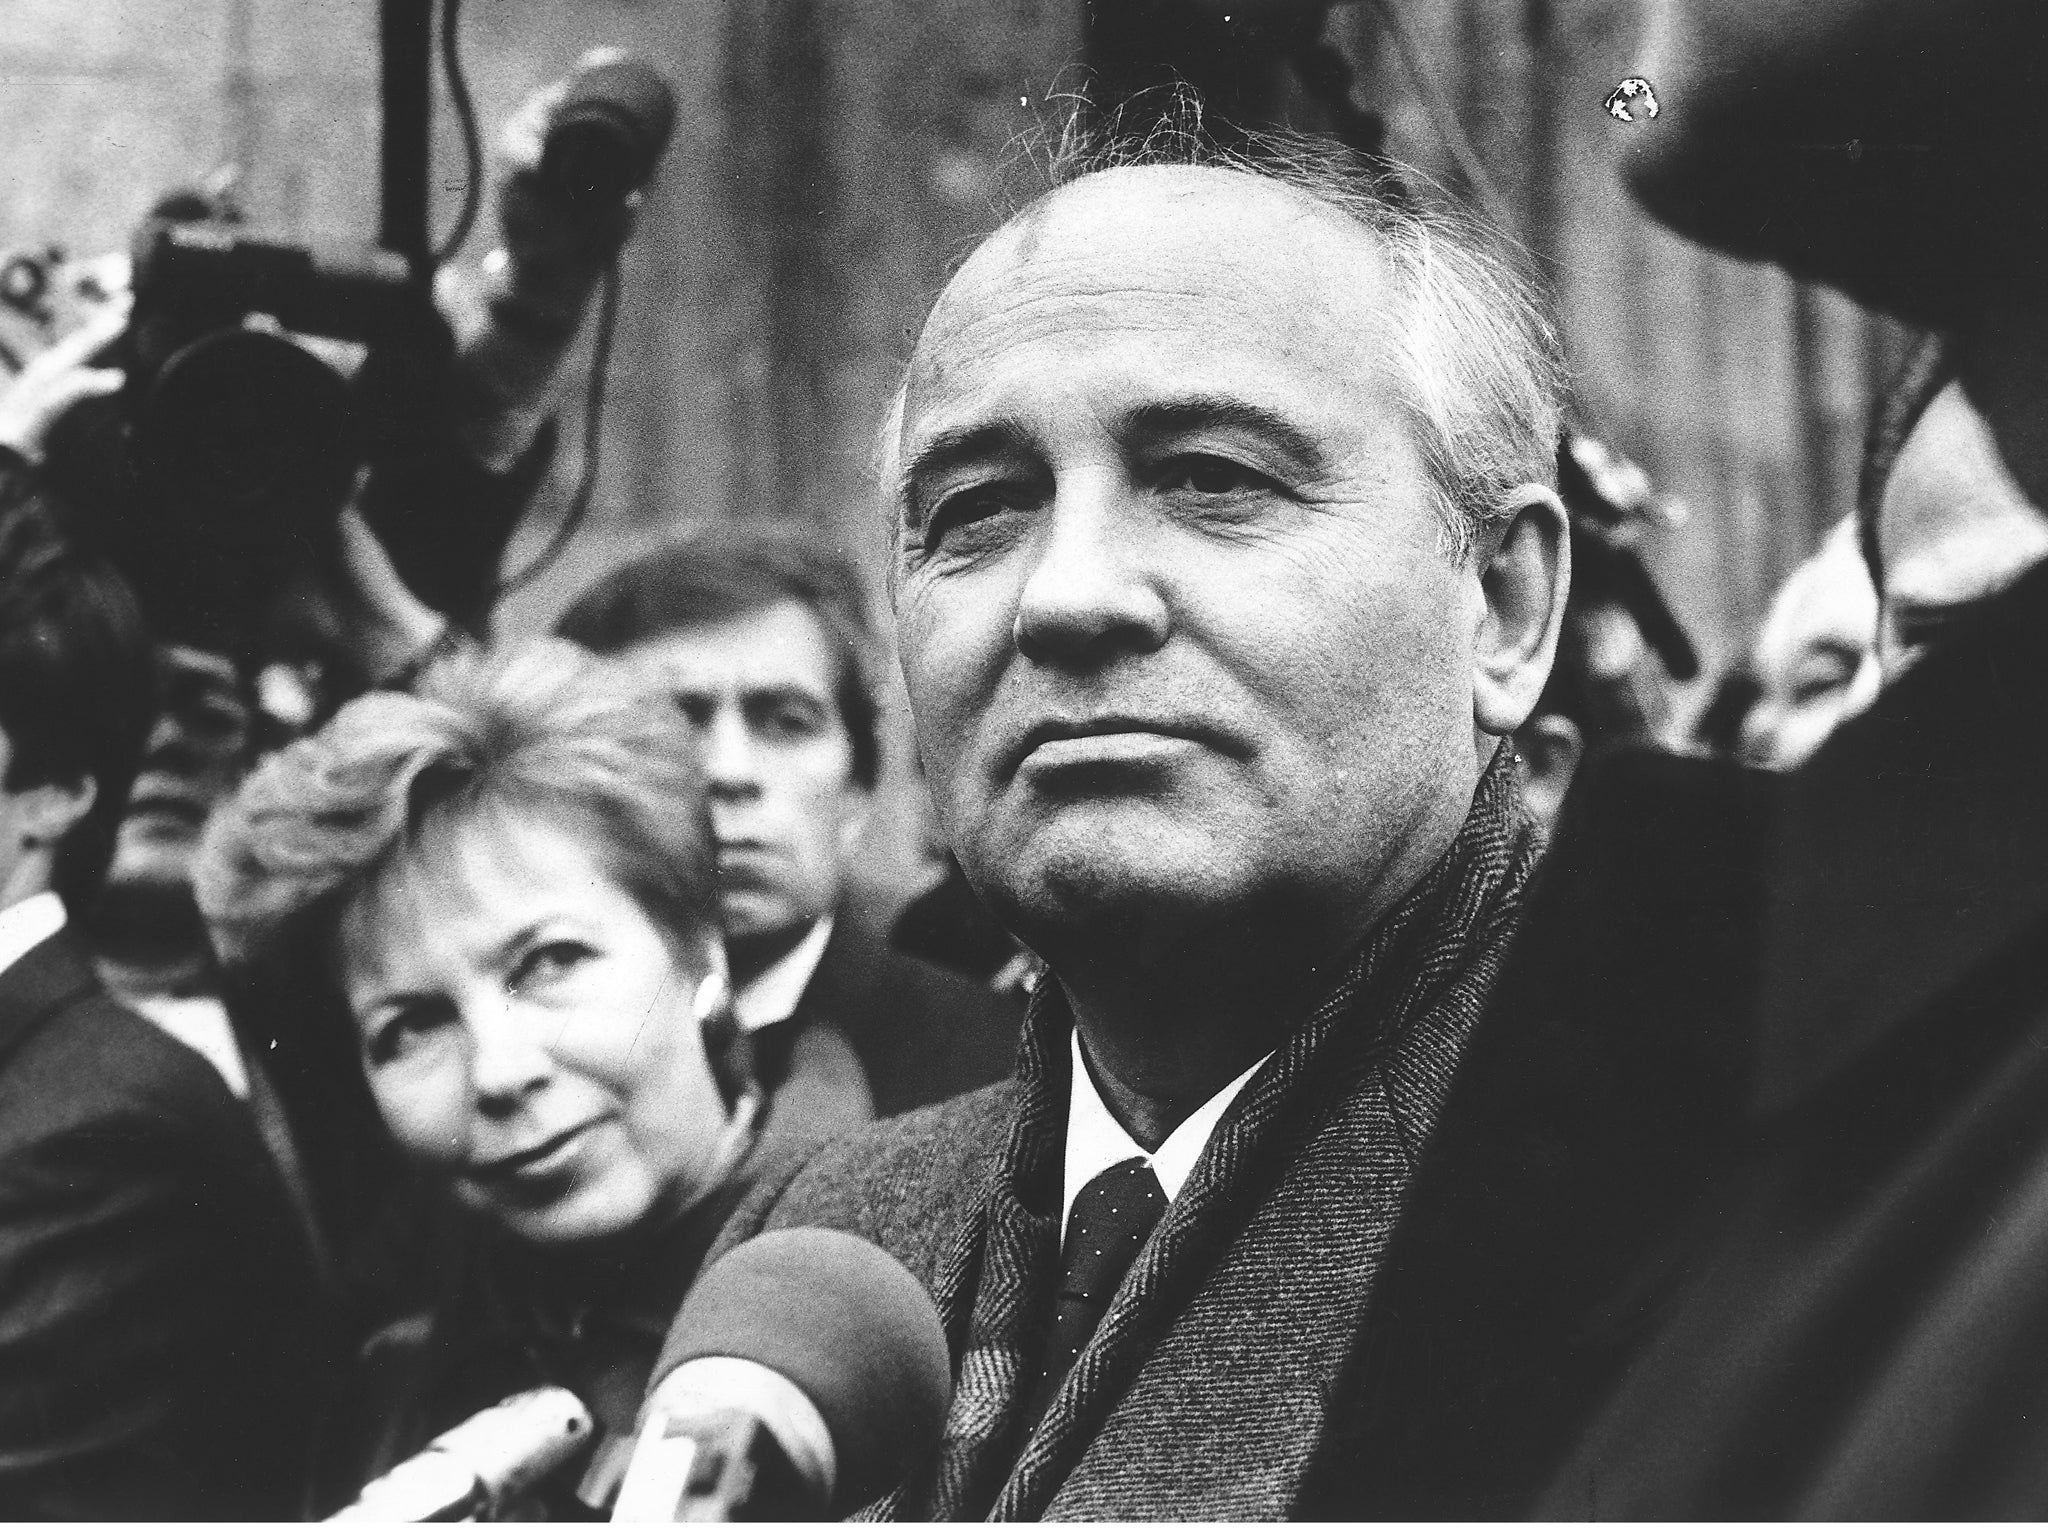 I met Gorbachev at Chequers when he visited Margaret Thatcher for the first time in 1984